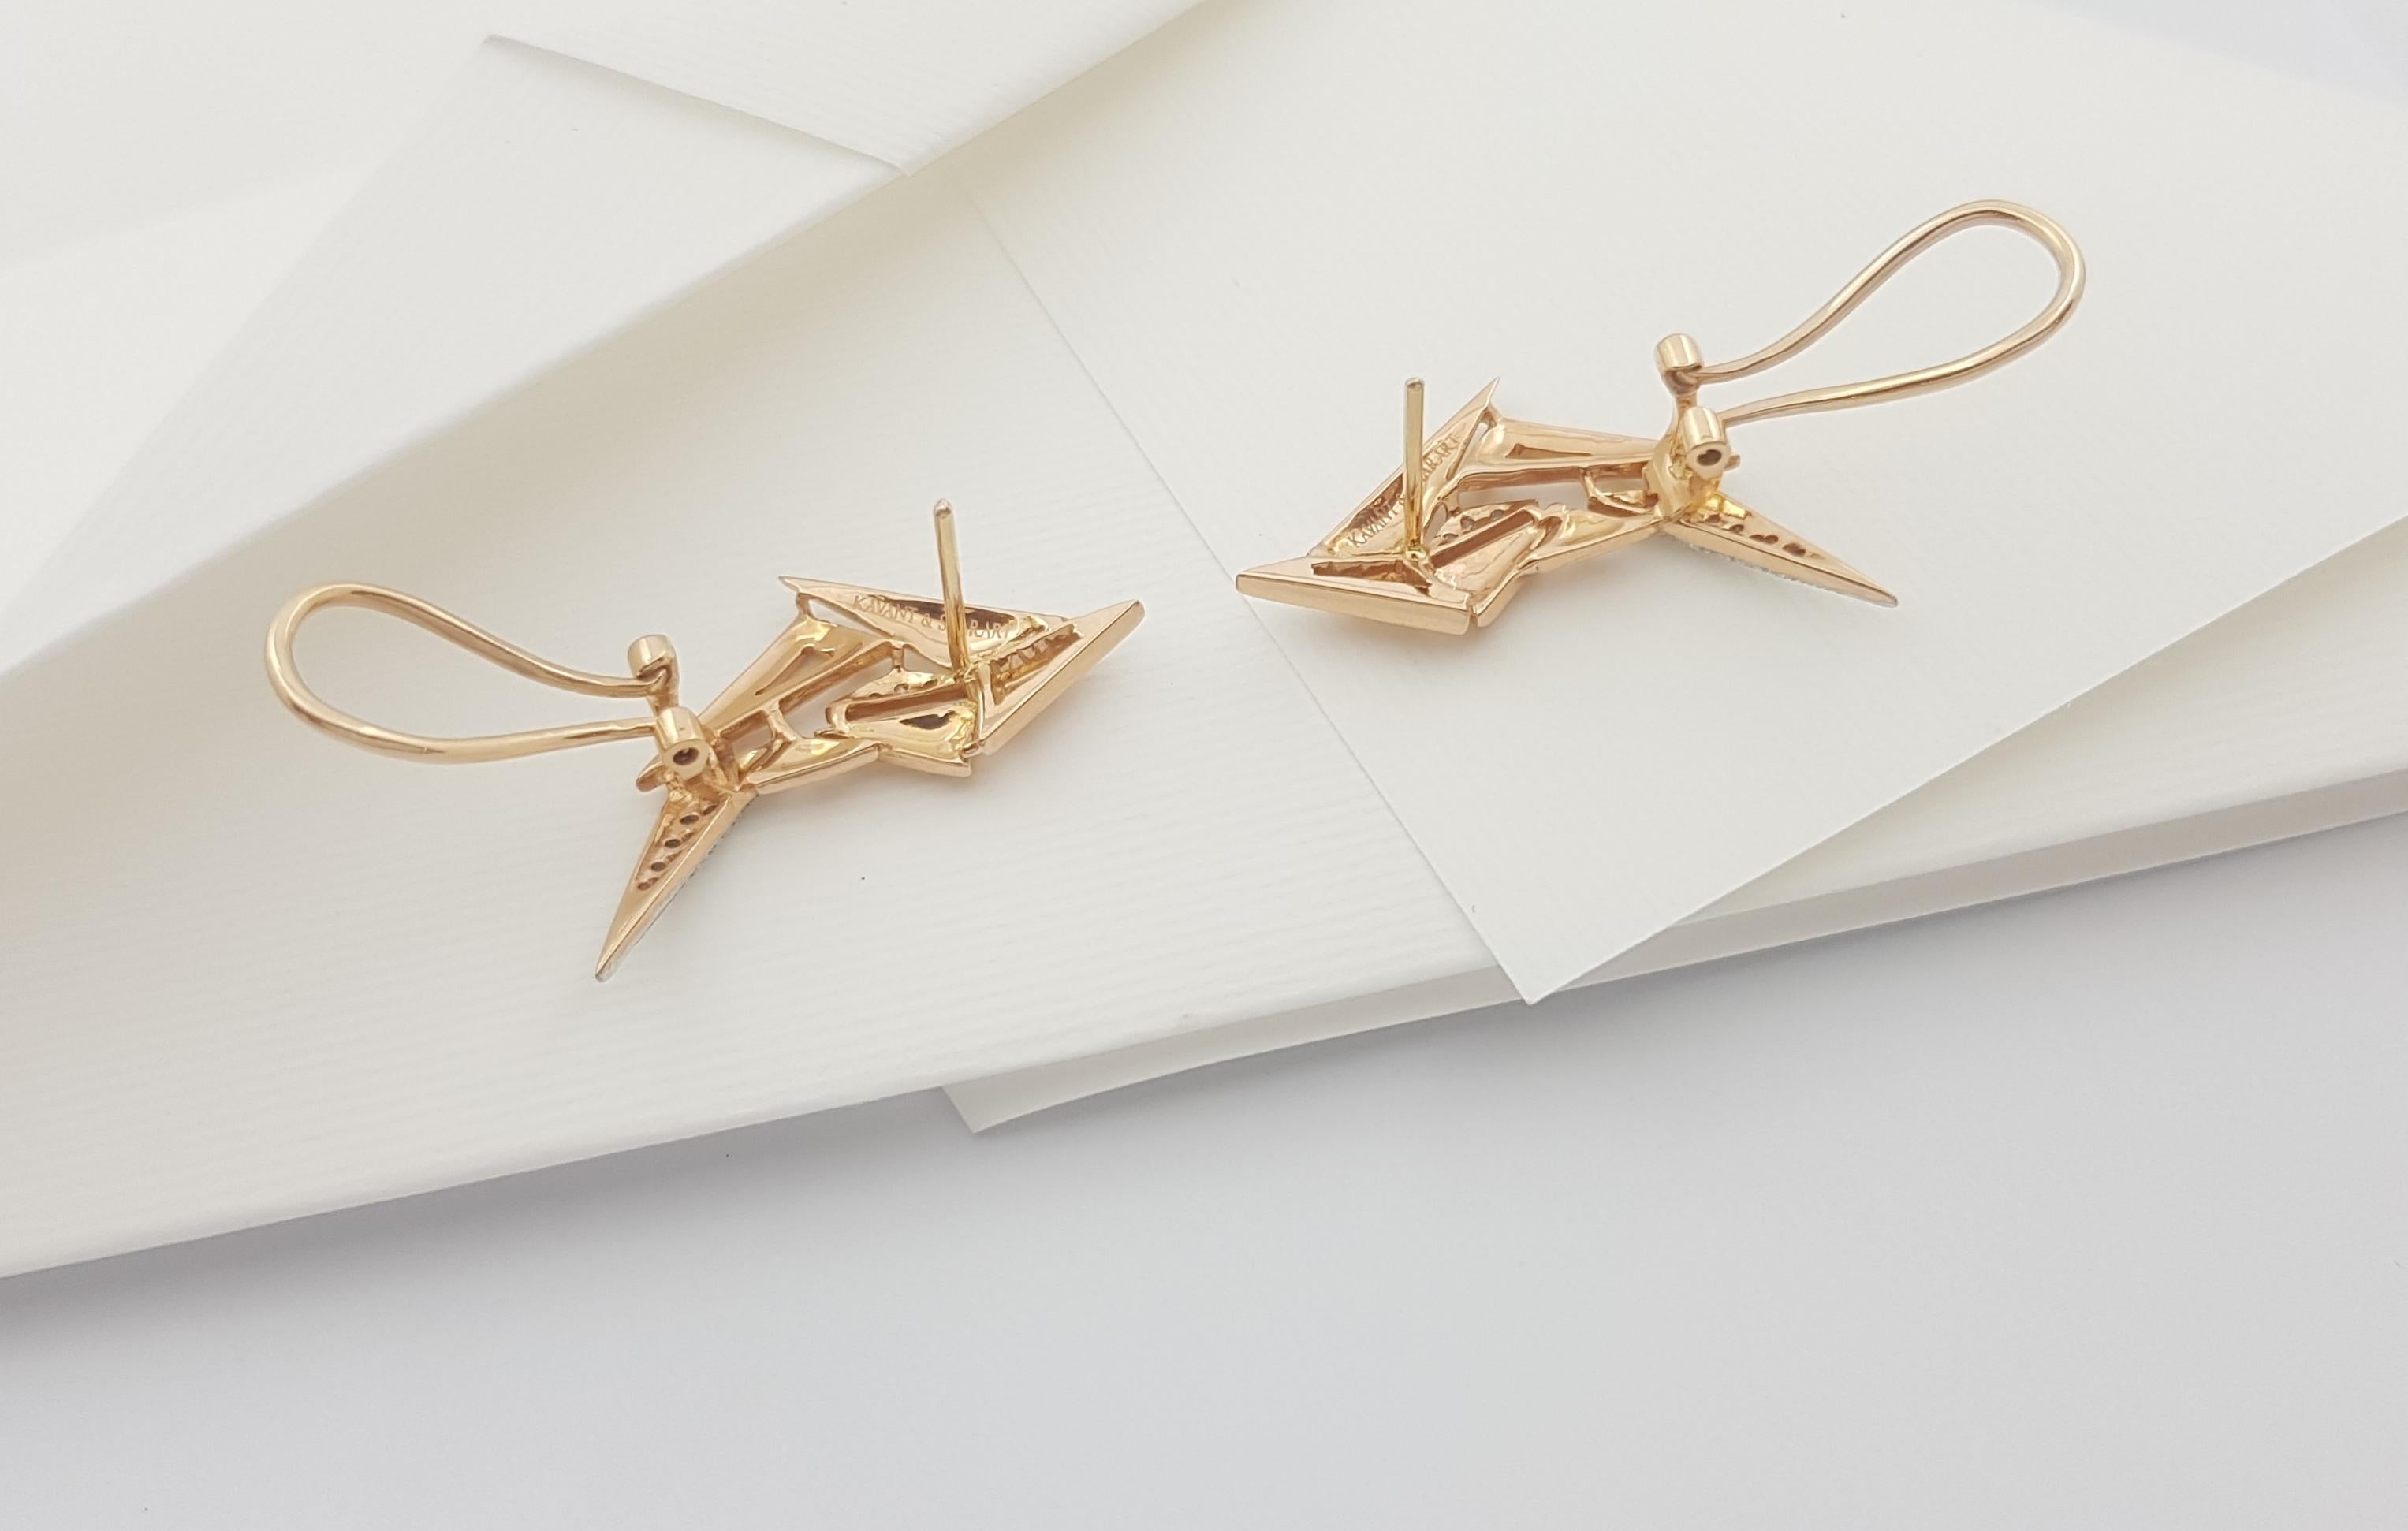 Brilliant Cut Origami Brushed Gold Diamond Swan Earrings 18k Rose Gold For Sale